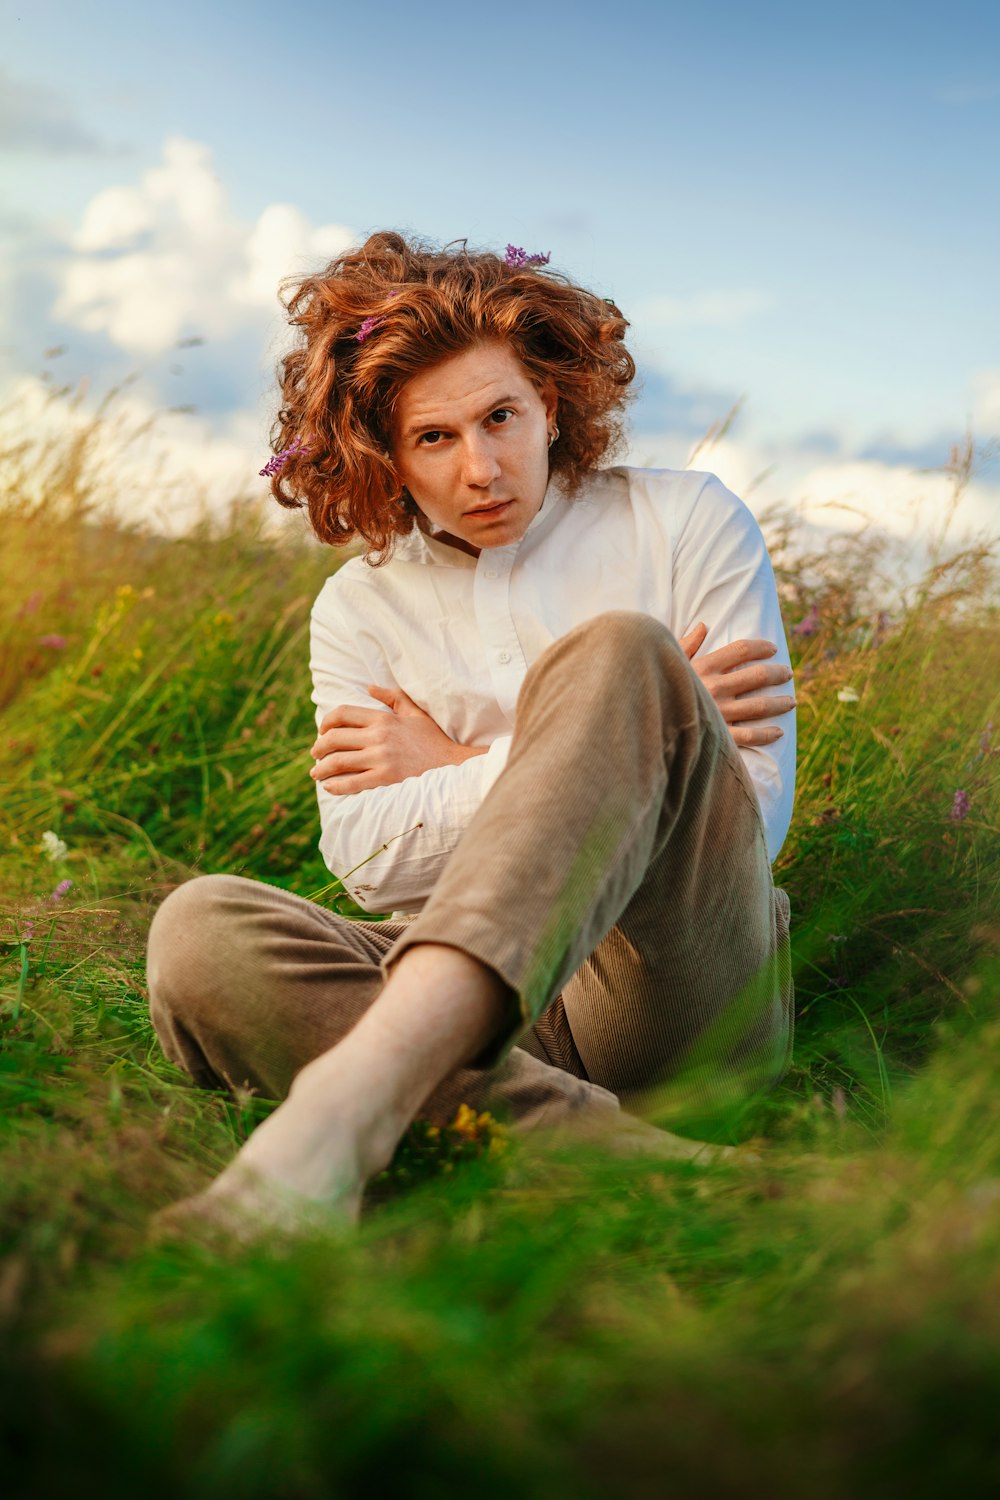 a woman with red hair sitting in a field